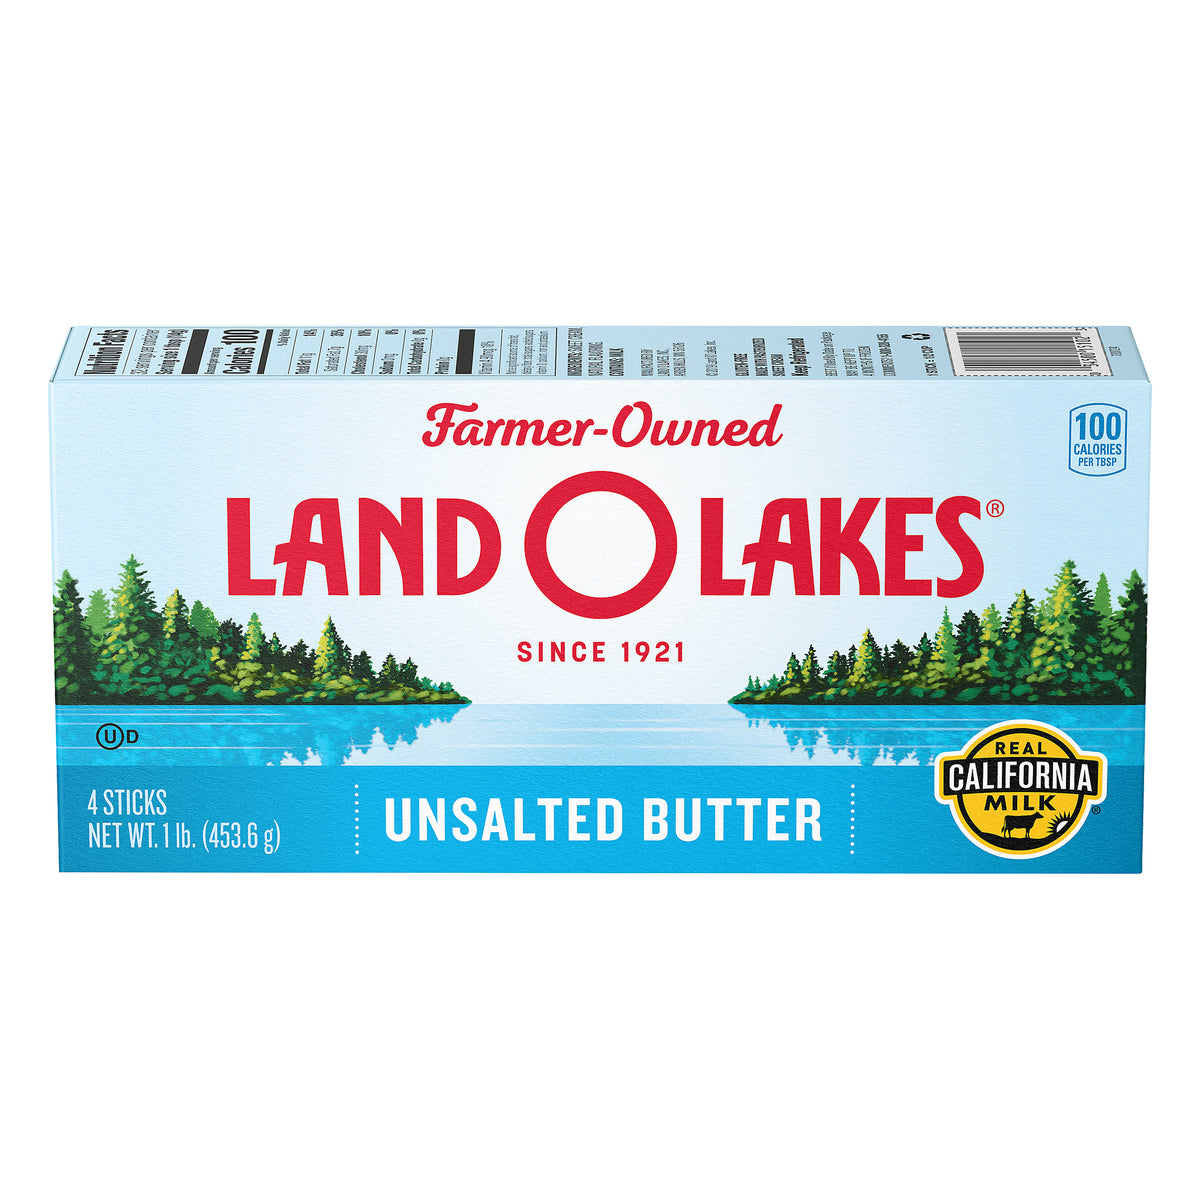 Land O' Lakes 1/2 Sticks of Salted Butter!